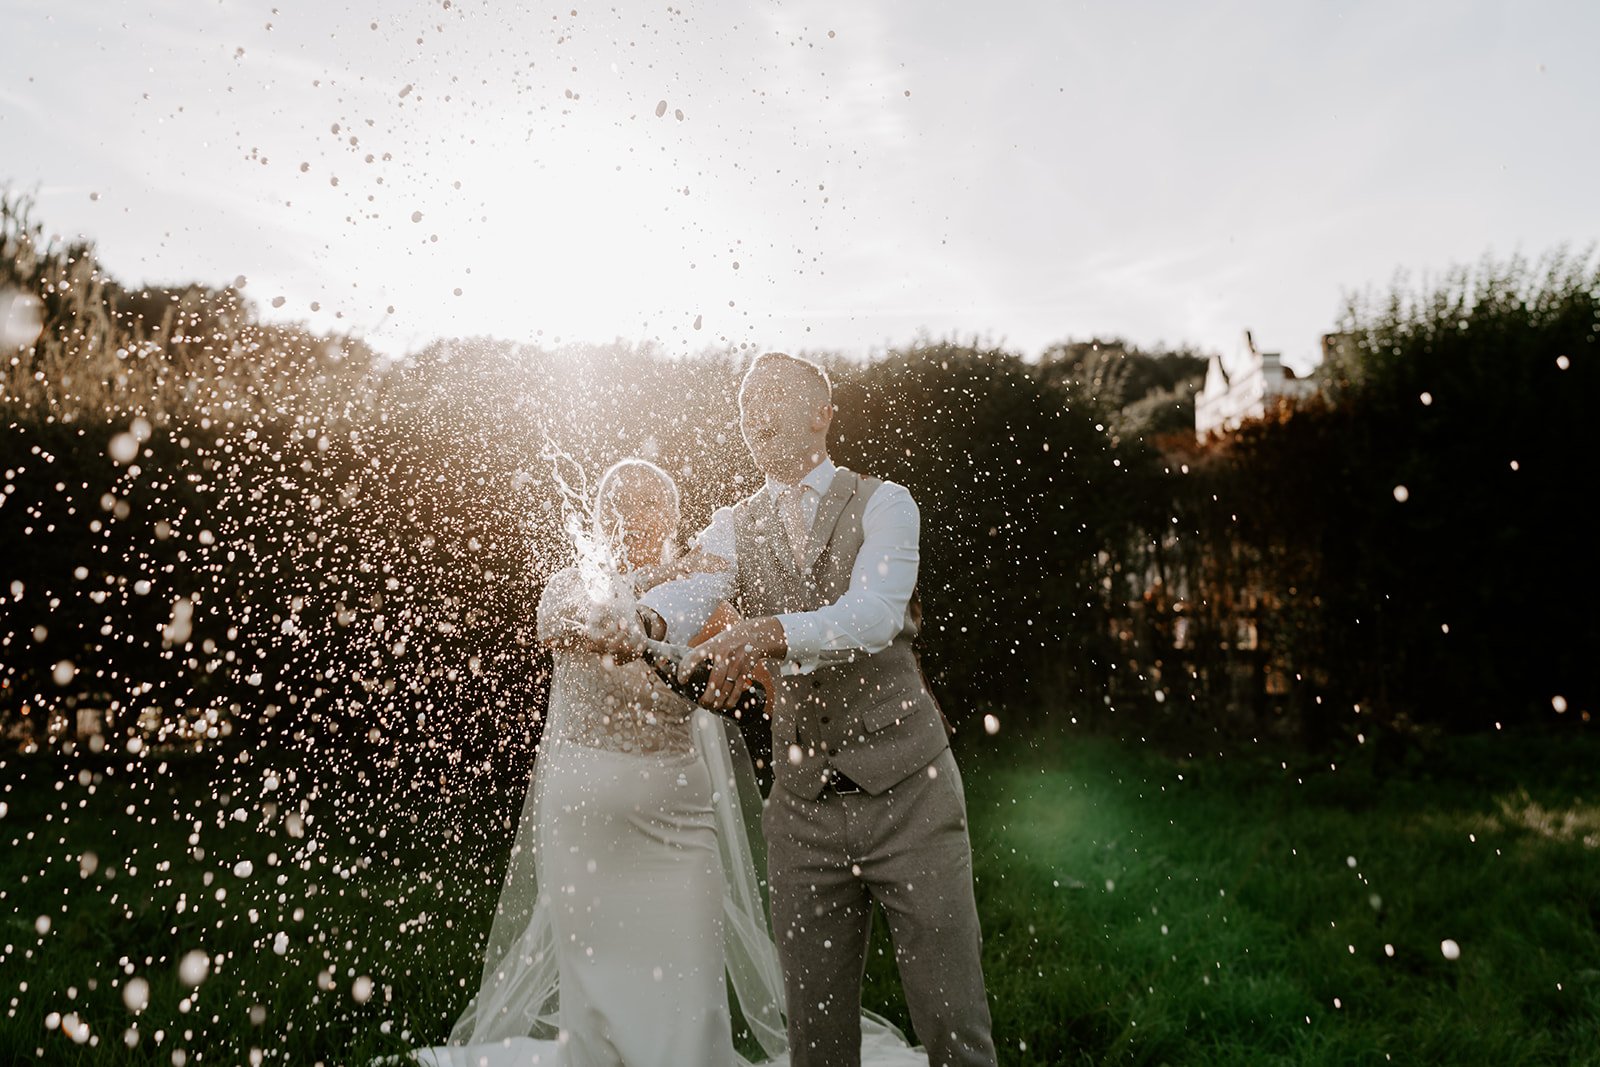 couple spraying champagne during golden hour with sun setting behind them and highlighting the champagne droplets 